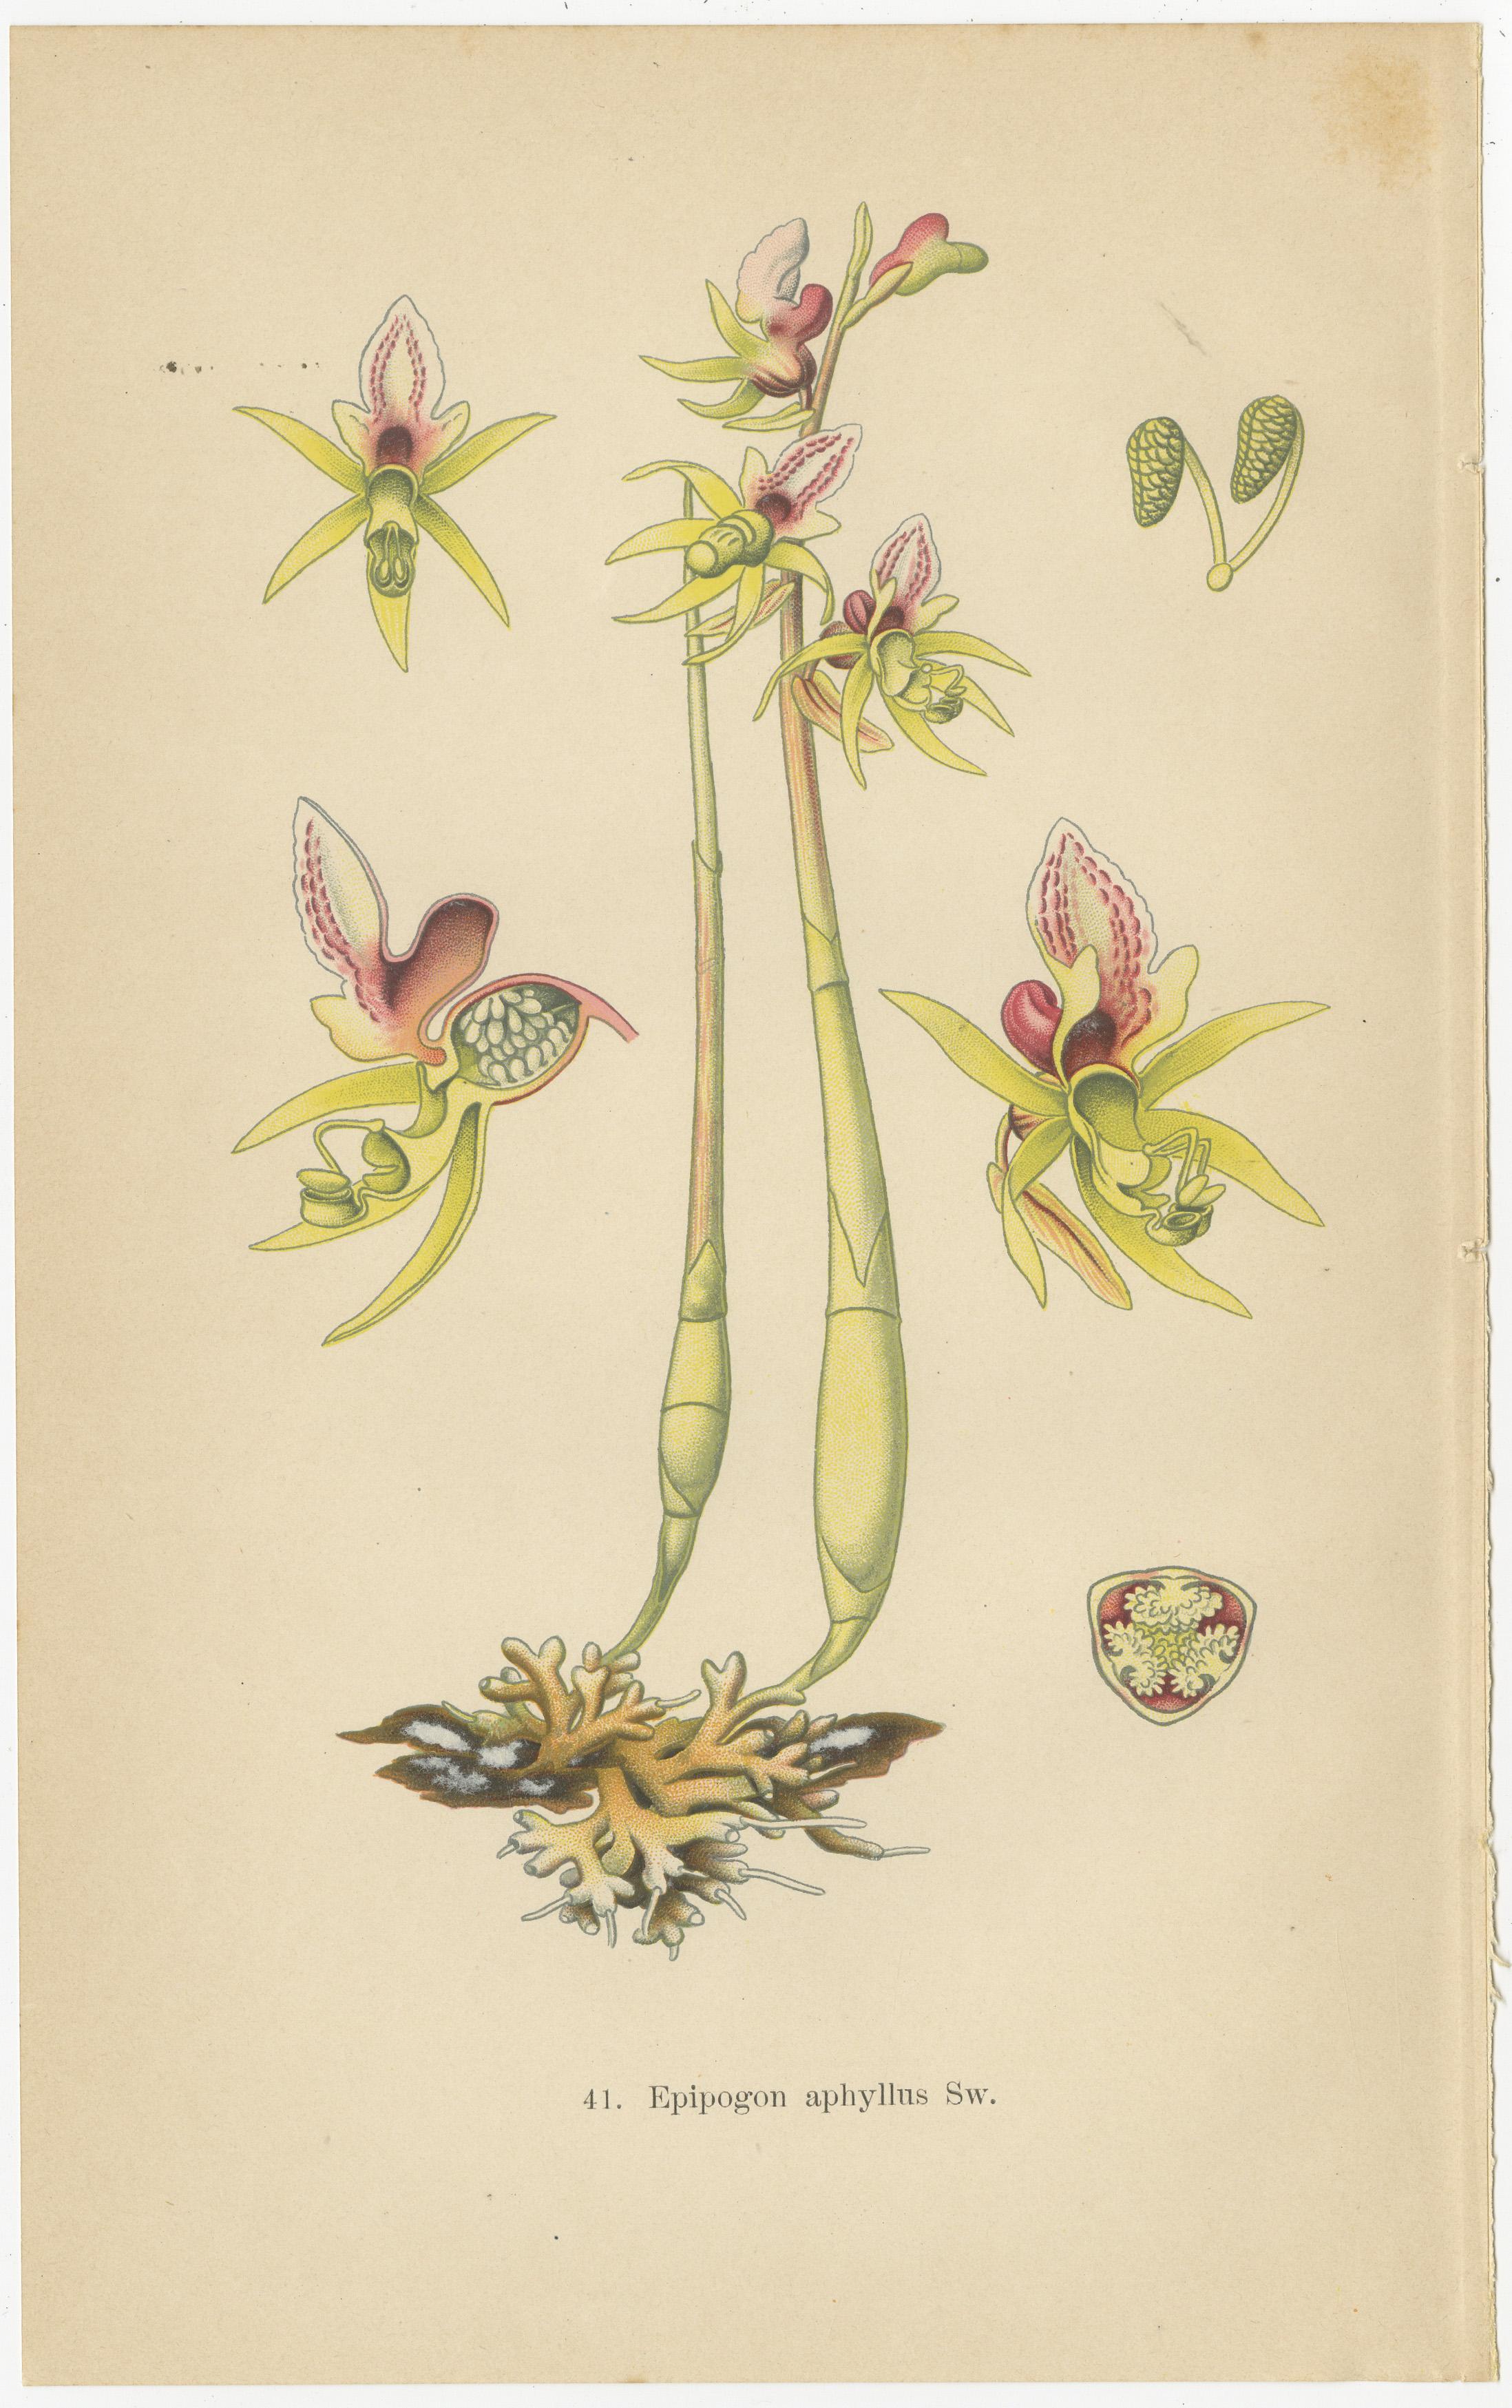 Floral Symphony: Müller's 1904 Botanical Illustrations

This collage comprises three botanical prints from Walter Müller's 1904 tome, which meticulously recorded the primary forms of orchid species found in Germany and its neighboring areas. 

The